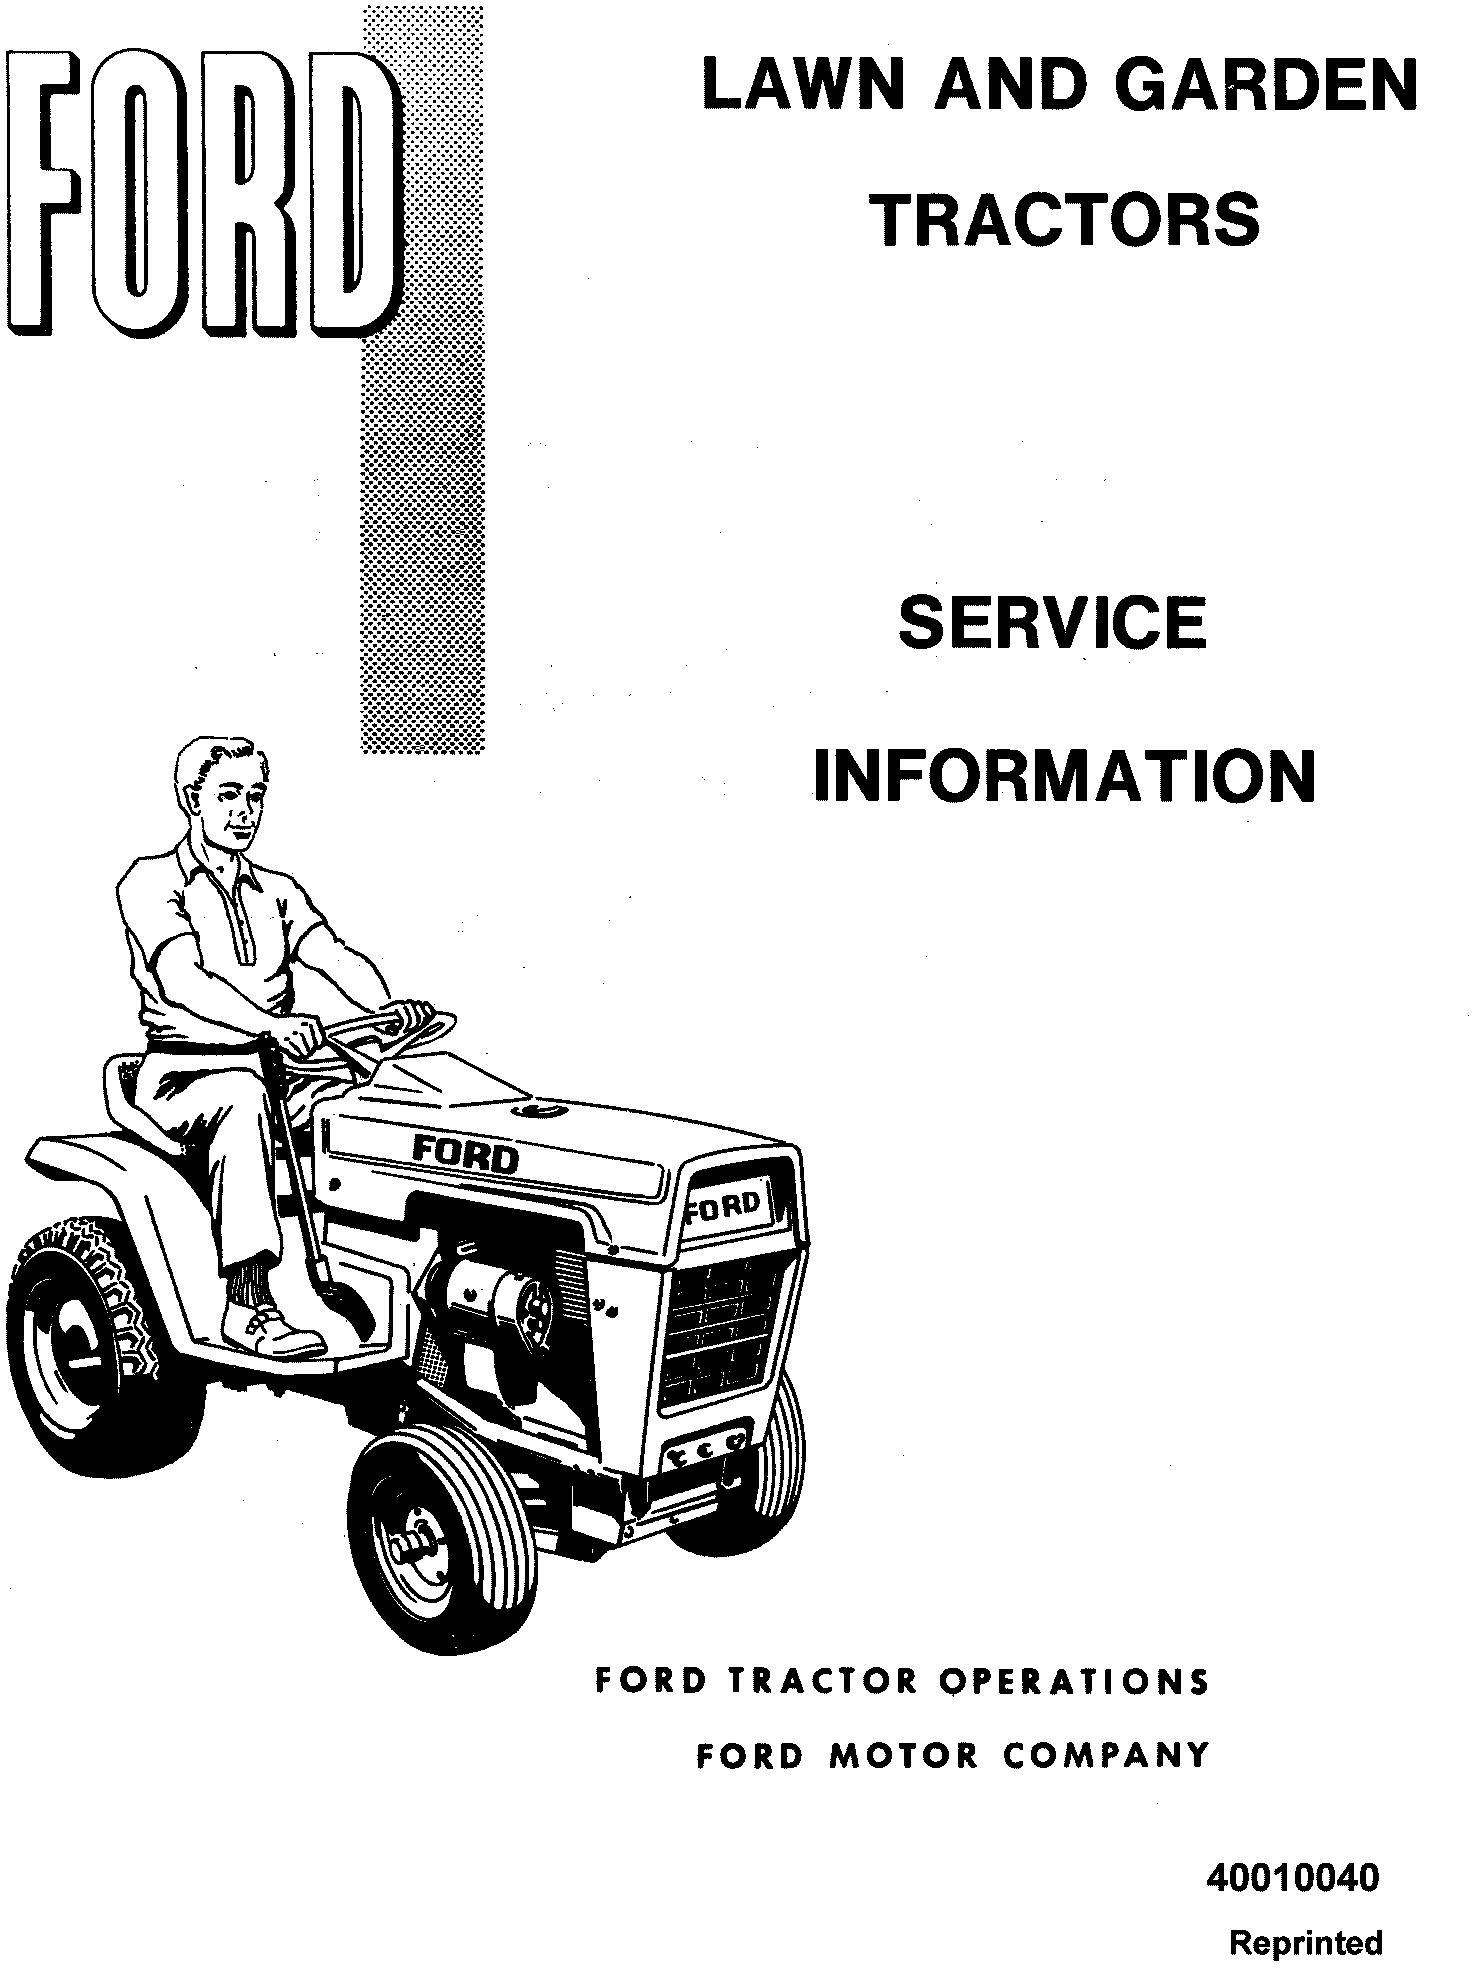 Ford 100, 120, 125, 145 Garden Tractor Service Manual (Se3391)